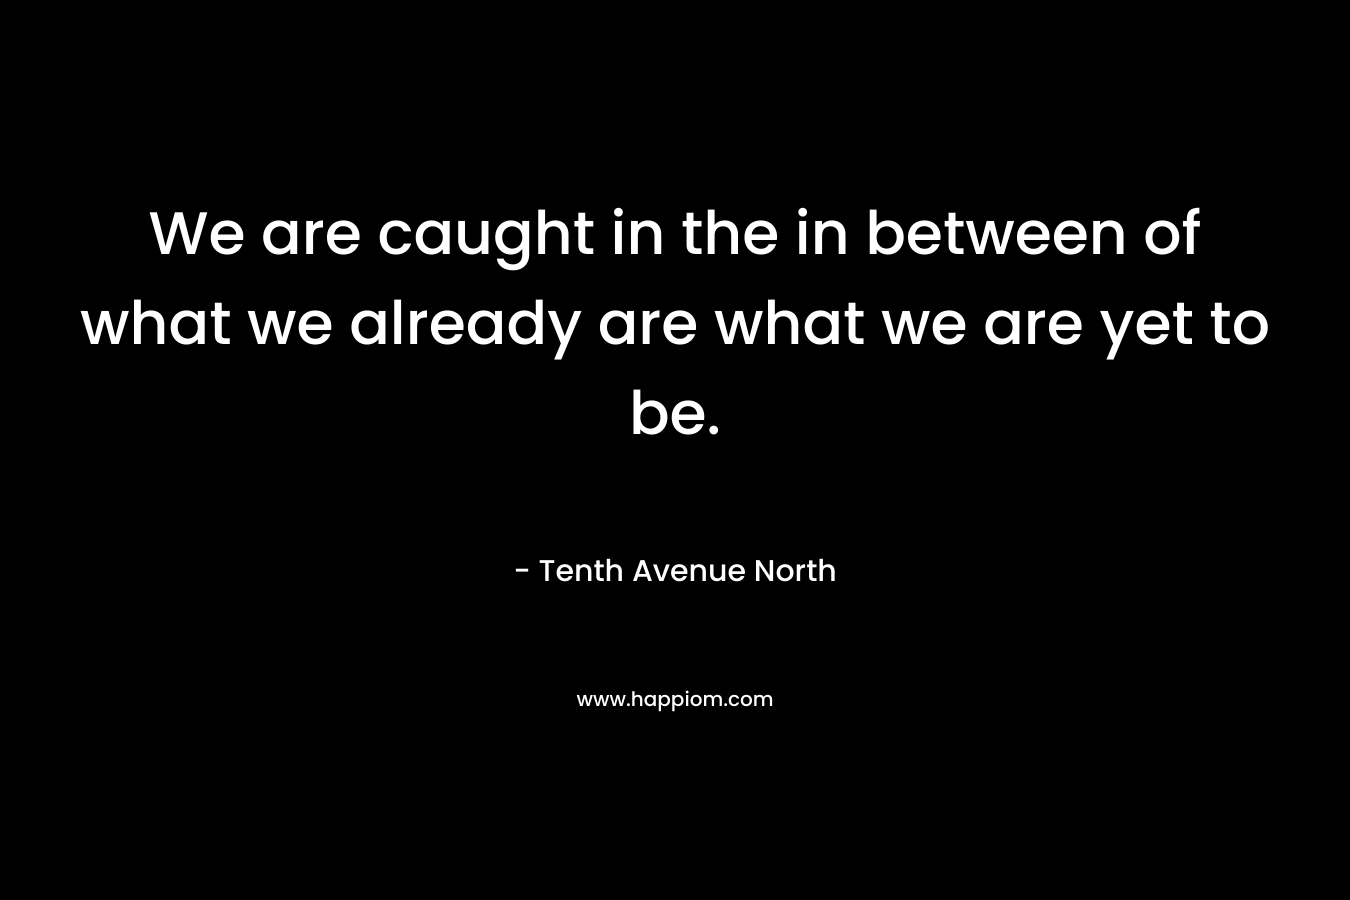 We are caught in the in between of what we already are what we are yet to be.